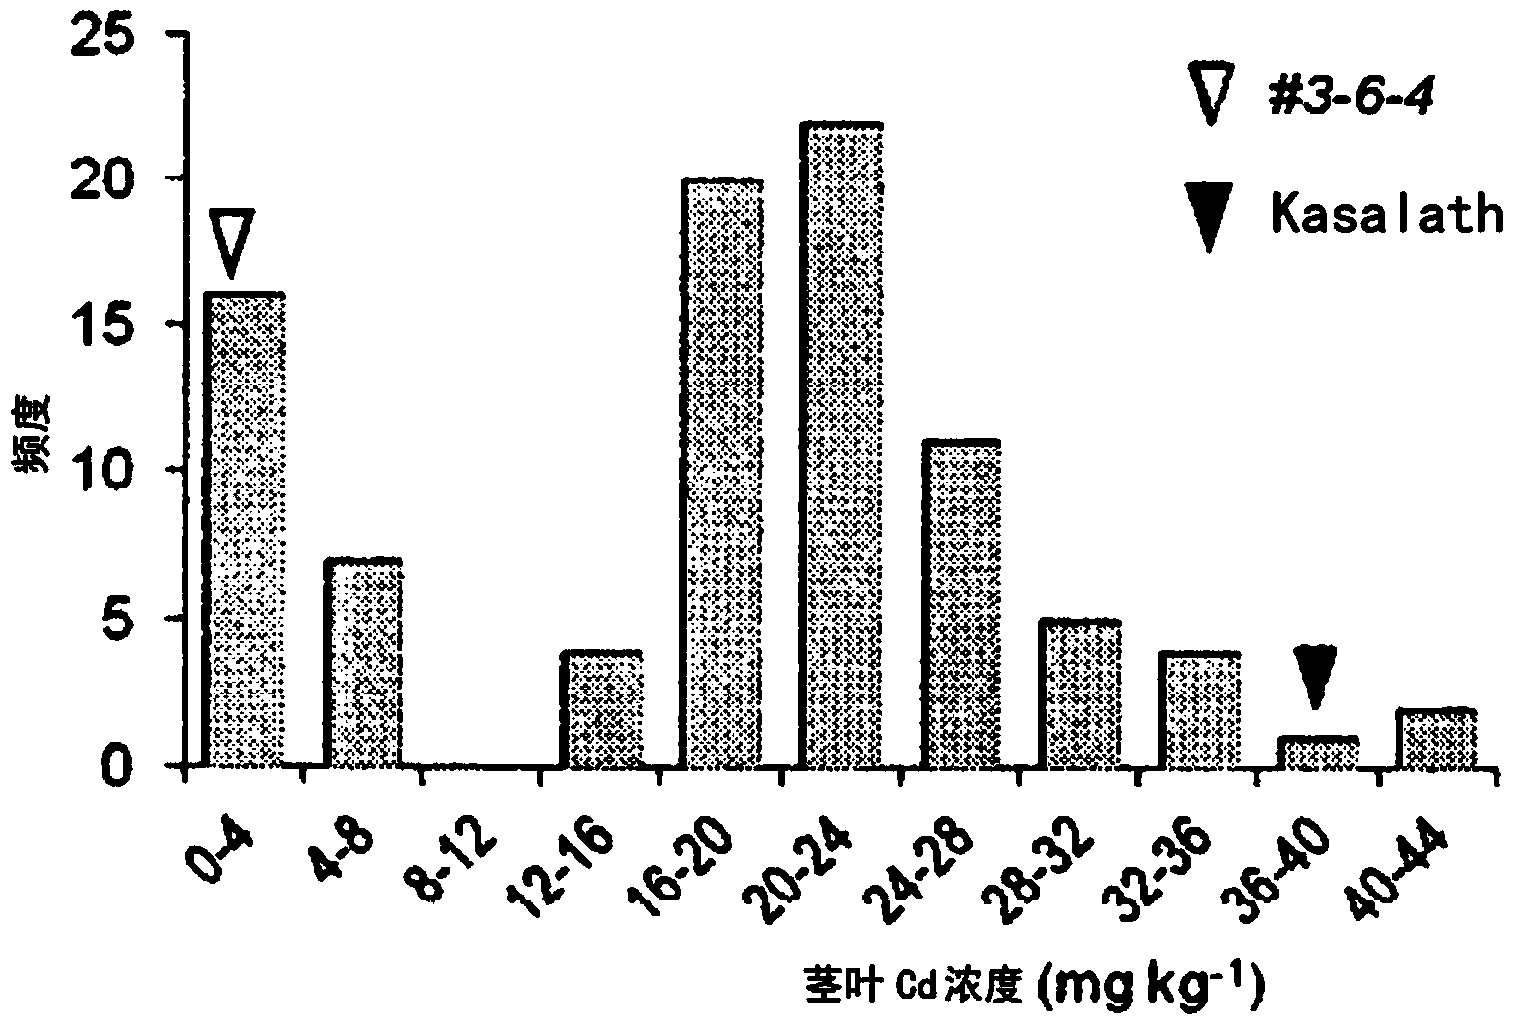 Cadmium absorption regulation gene, protein, and rice plant having reduced cadmium absorption